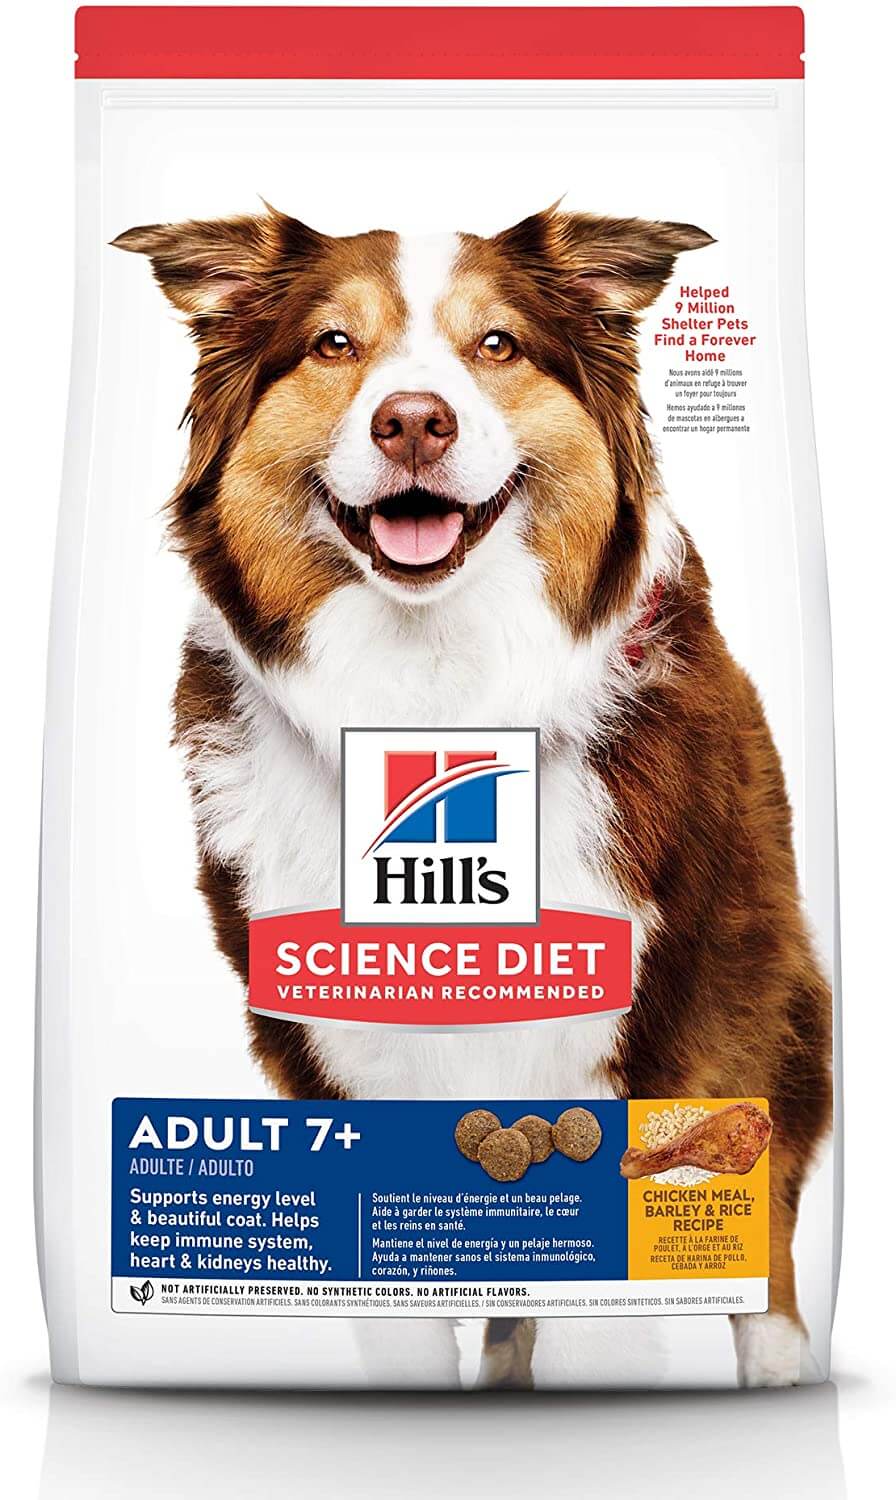 Hill's Science Diet 7+ for Senior Dogs Dry Dog Food